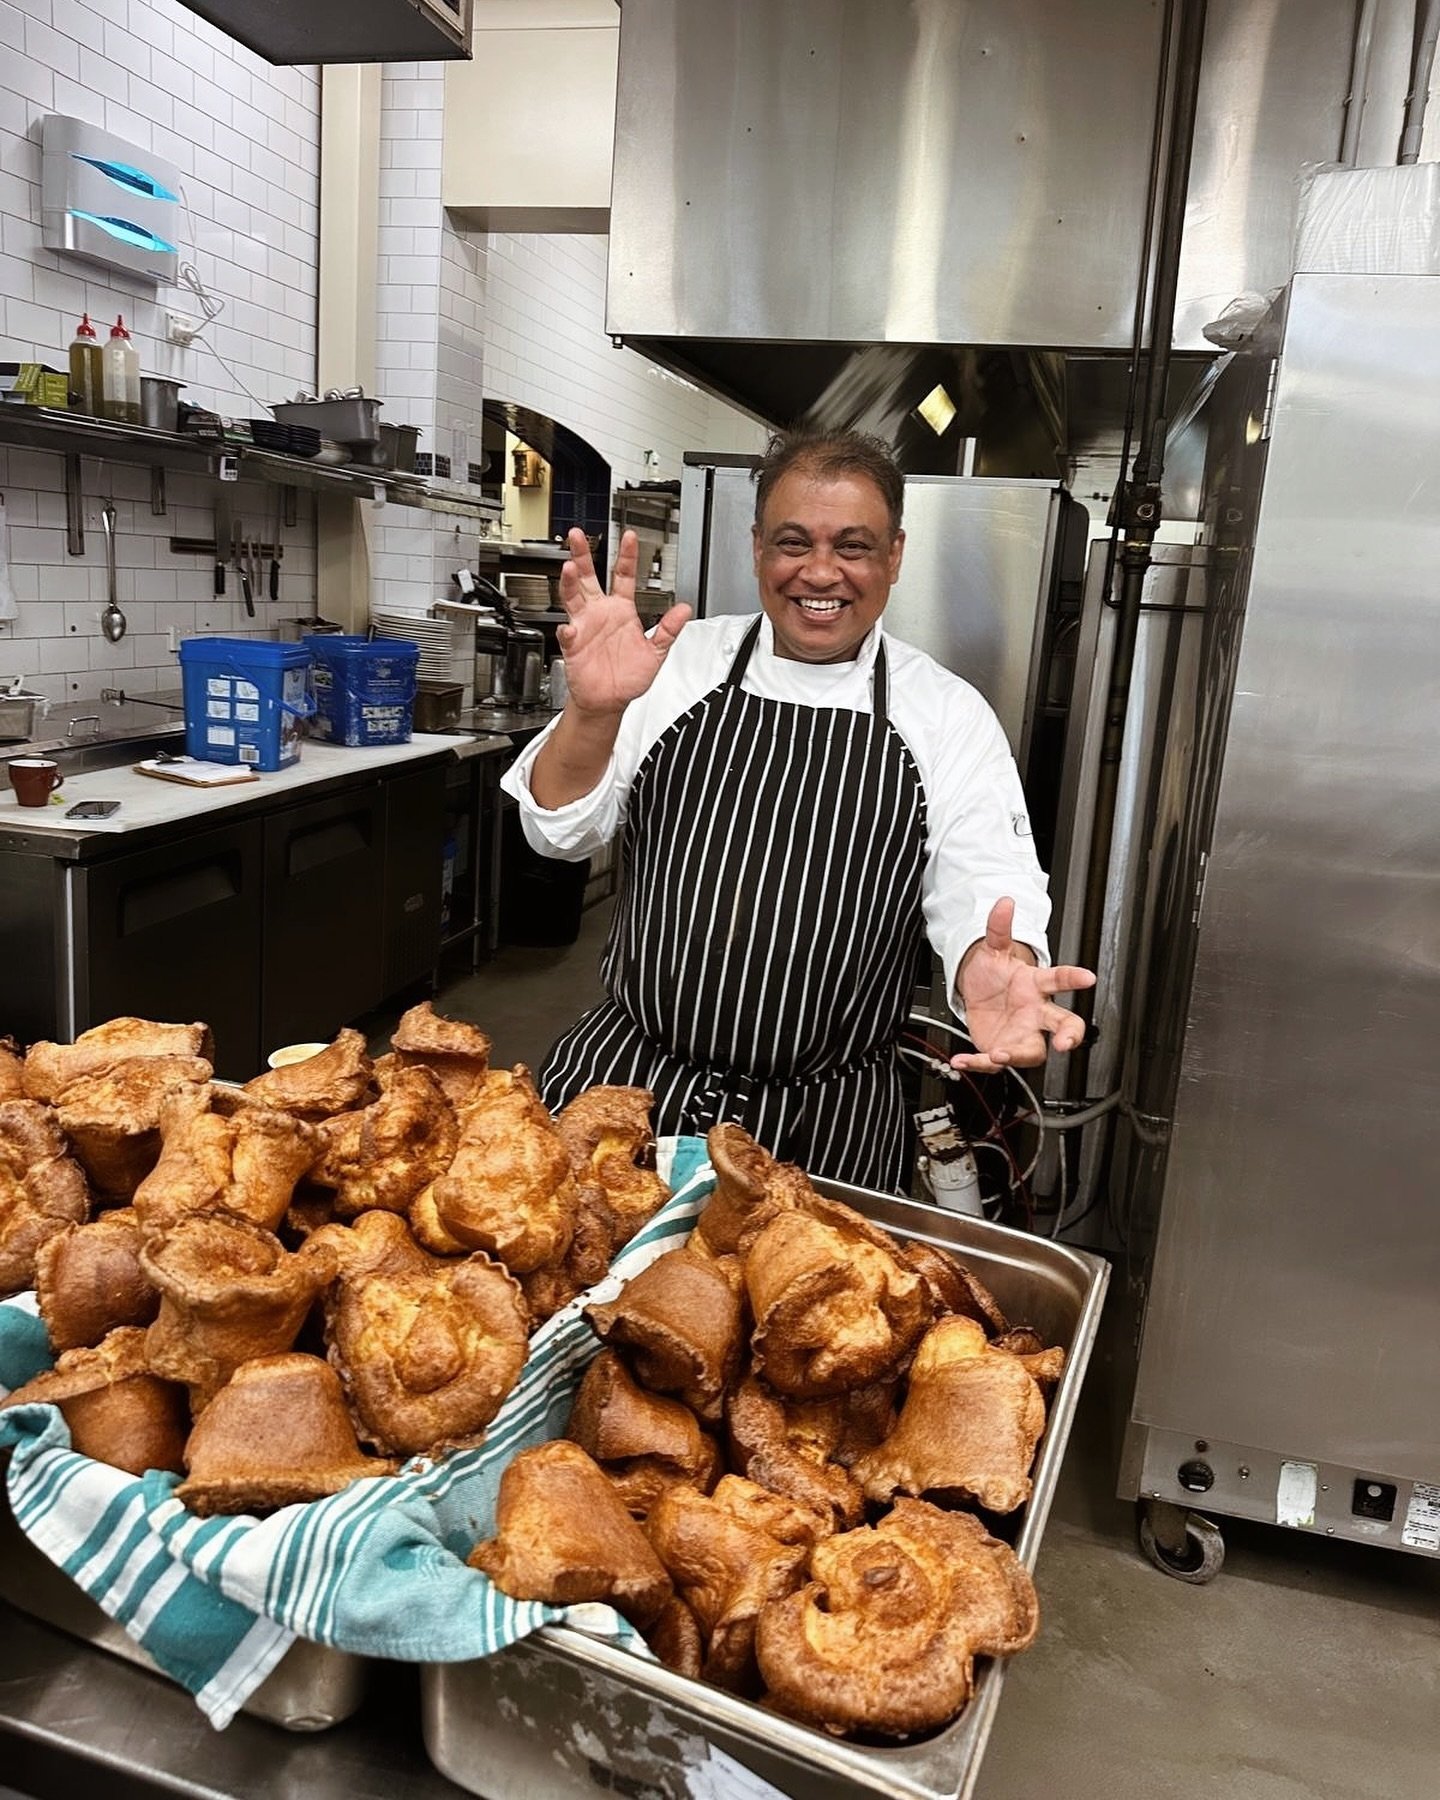 Look at these Yorkshire Puds! 🤤 

Traditional Sunday Roast with all the trimmings on today&rsquo;s menu. 

Pop in for lunch or dinner! 😉 

#thewindsor #thewindsorhotel #sundayroast